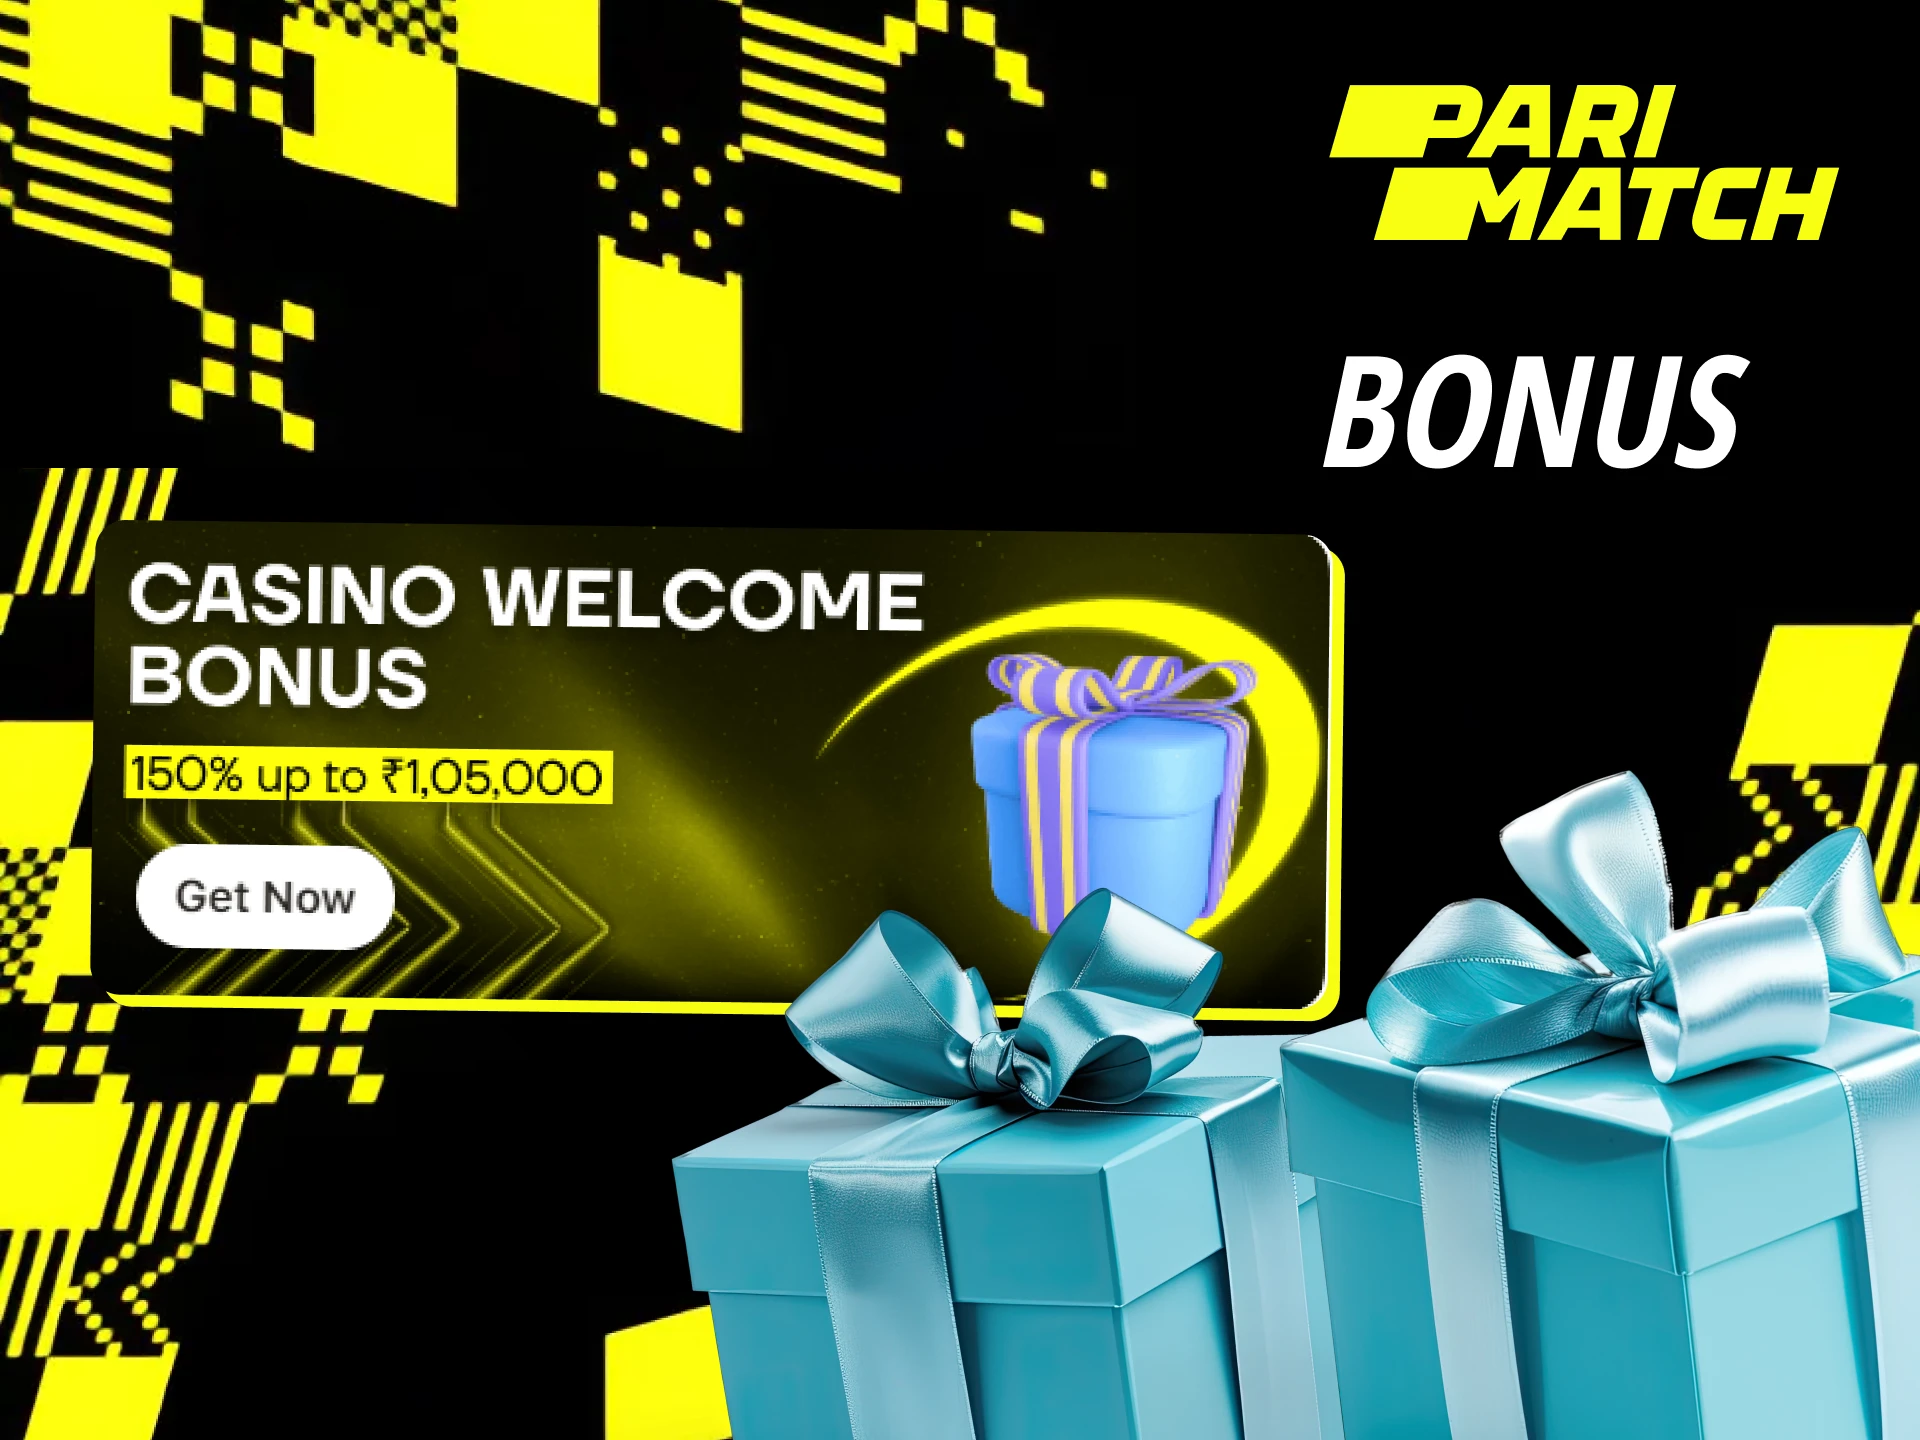 Before you start playing Crazy Time, get your Parimatch welcome bonus.